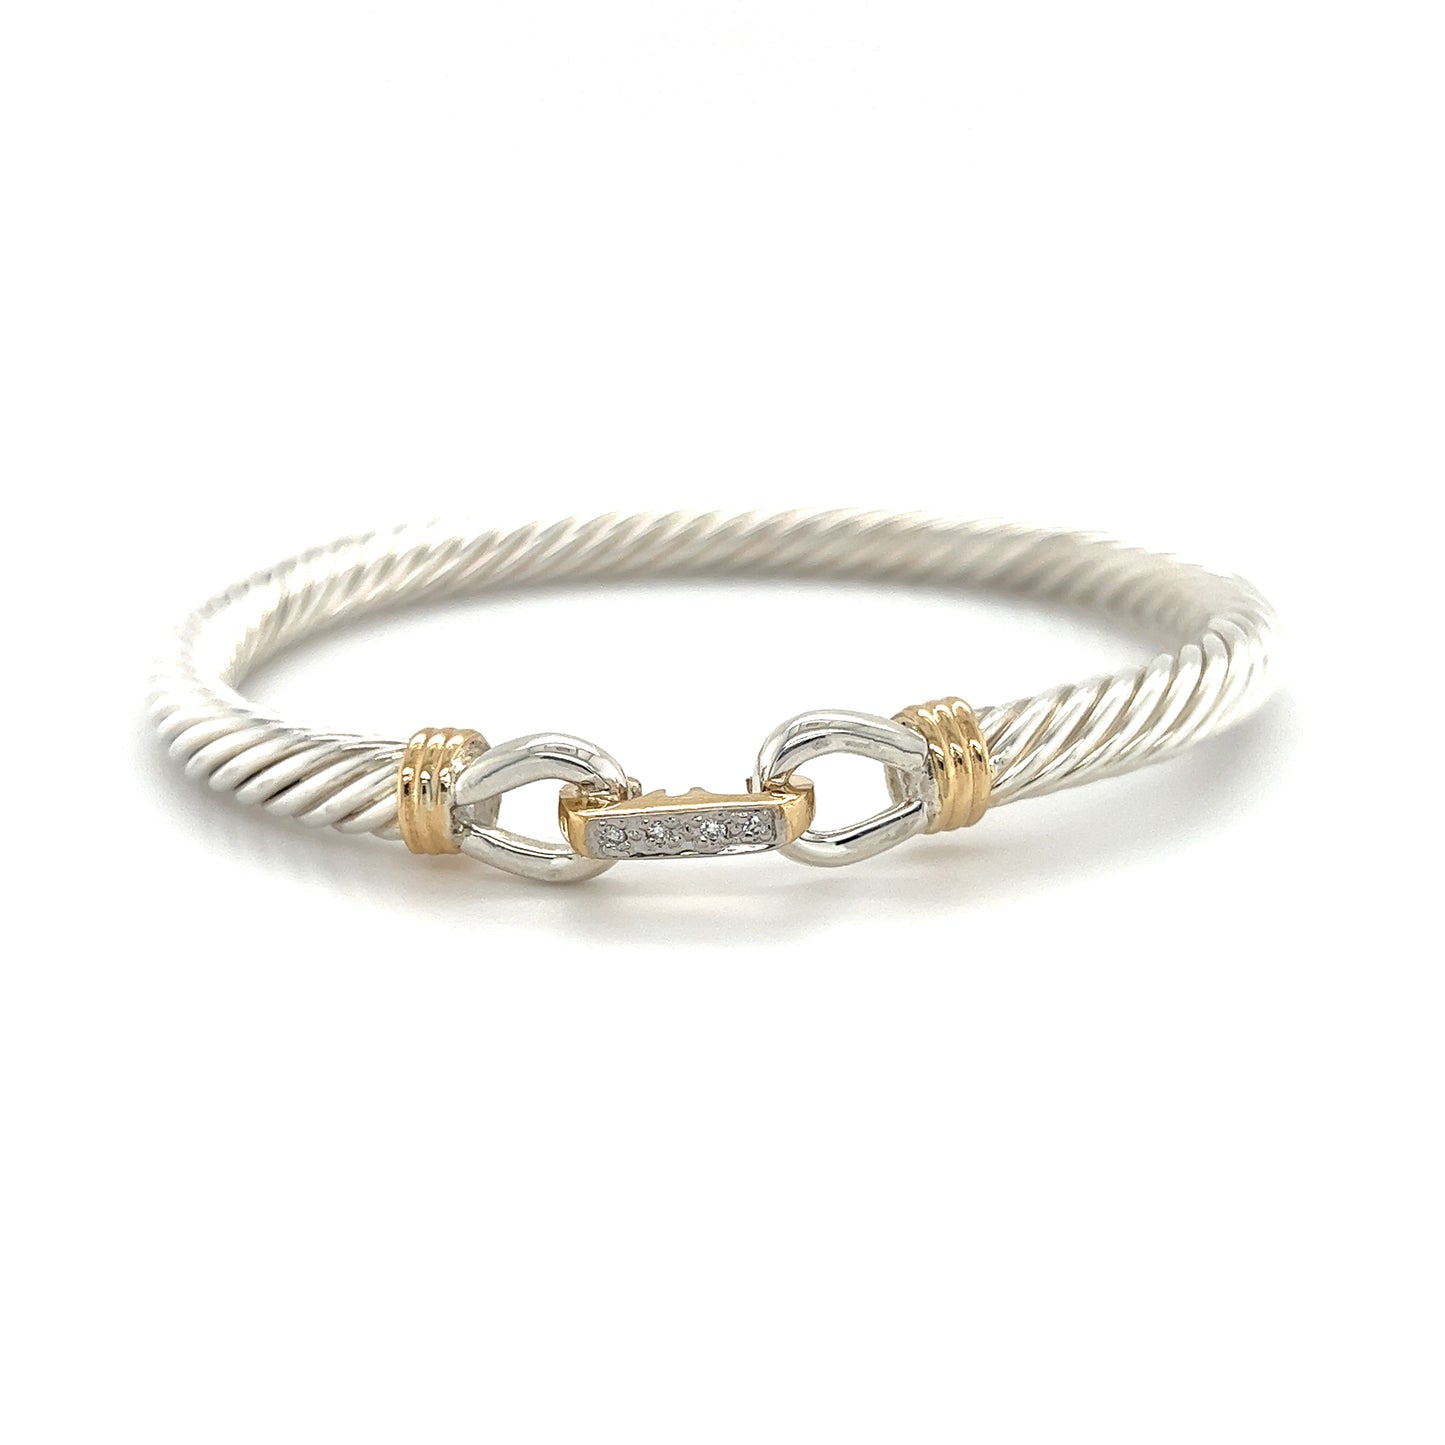 Twisted Cable 5mm Bangle Bracelet with Diamond Catch and 14K Yellow Gold Wraps in Sterling Silver Front Flat View